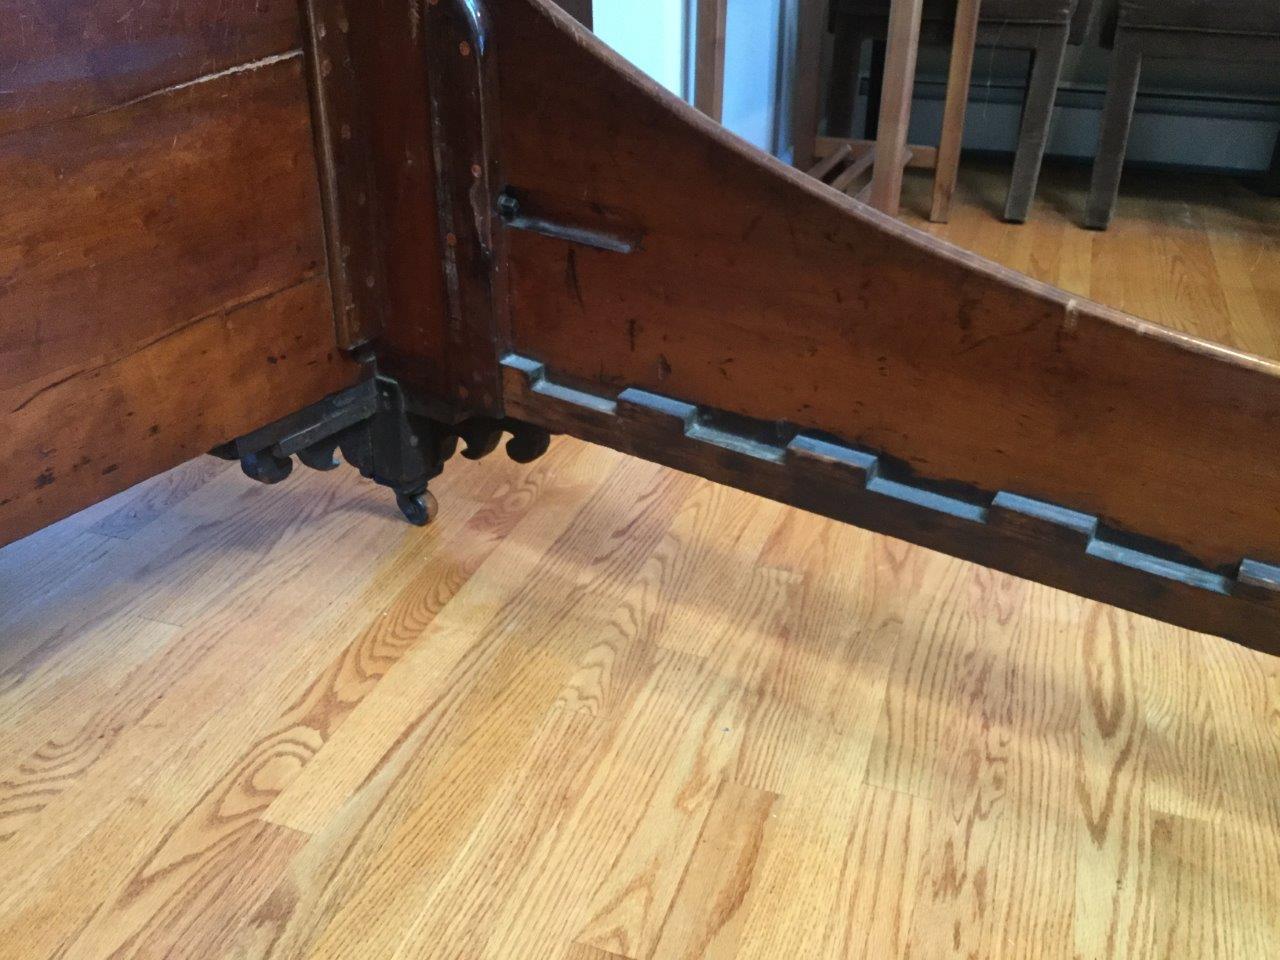 Handsome and elegant describe this early 20th century English Scottish sleigh bed. Made of flame mahogany, this bed will accommodate a full mattress. The head and footboard are of the same height and the side rails are both finished and very